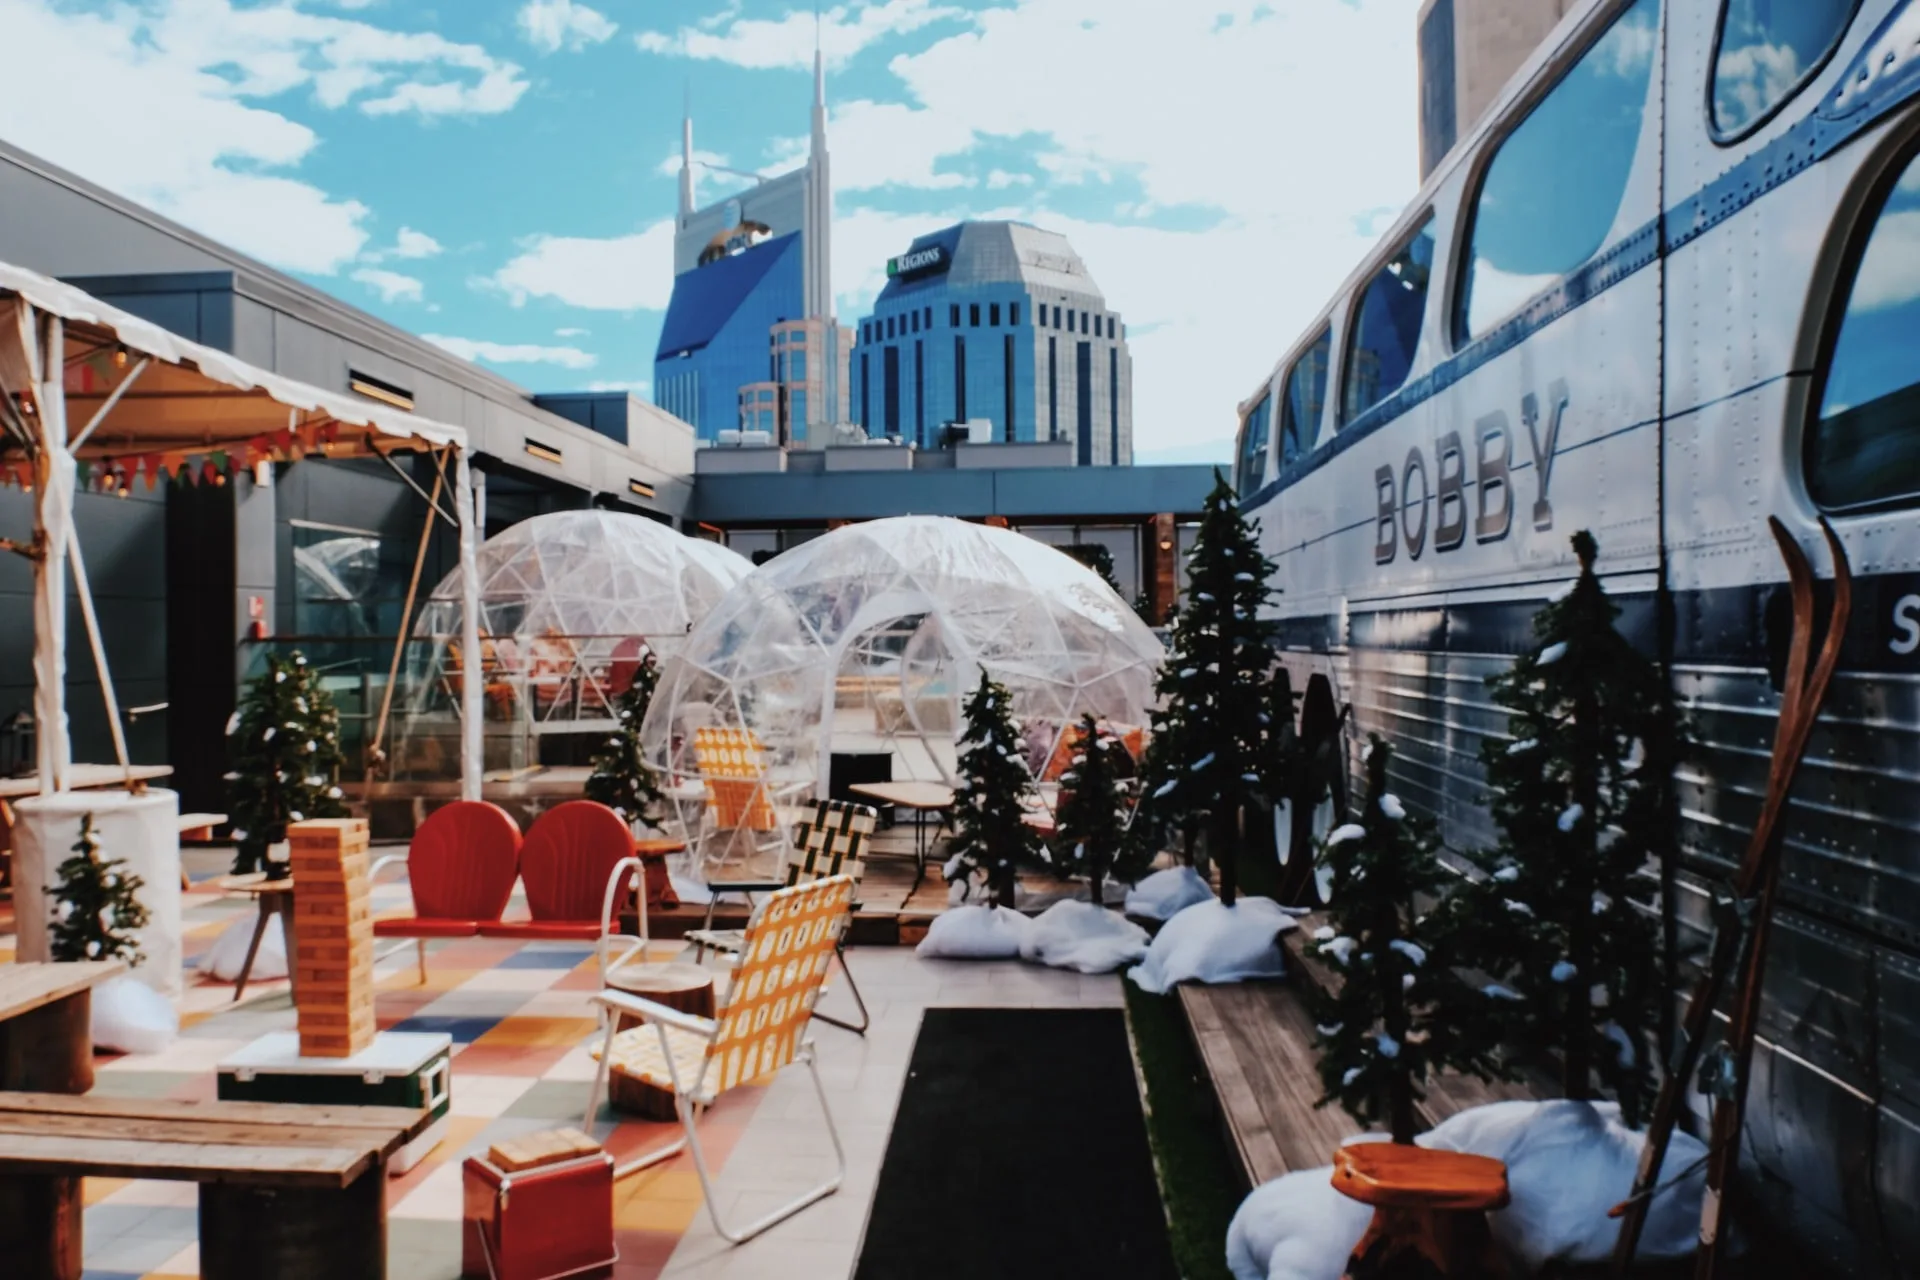 bobby hotel rooftop bar in nashville with outdoor igloos and bus overlooking nashville skyline